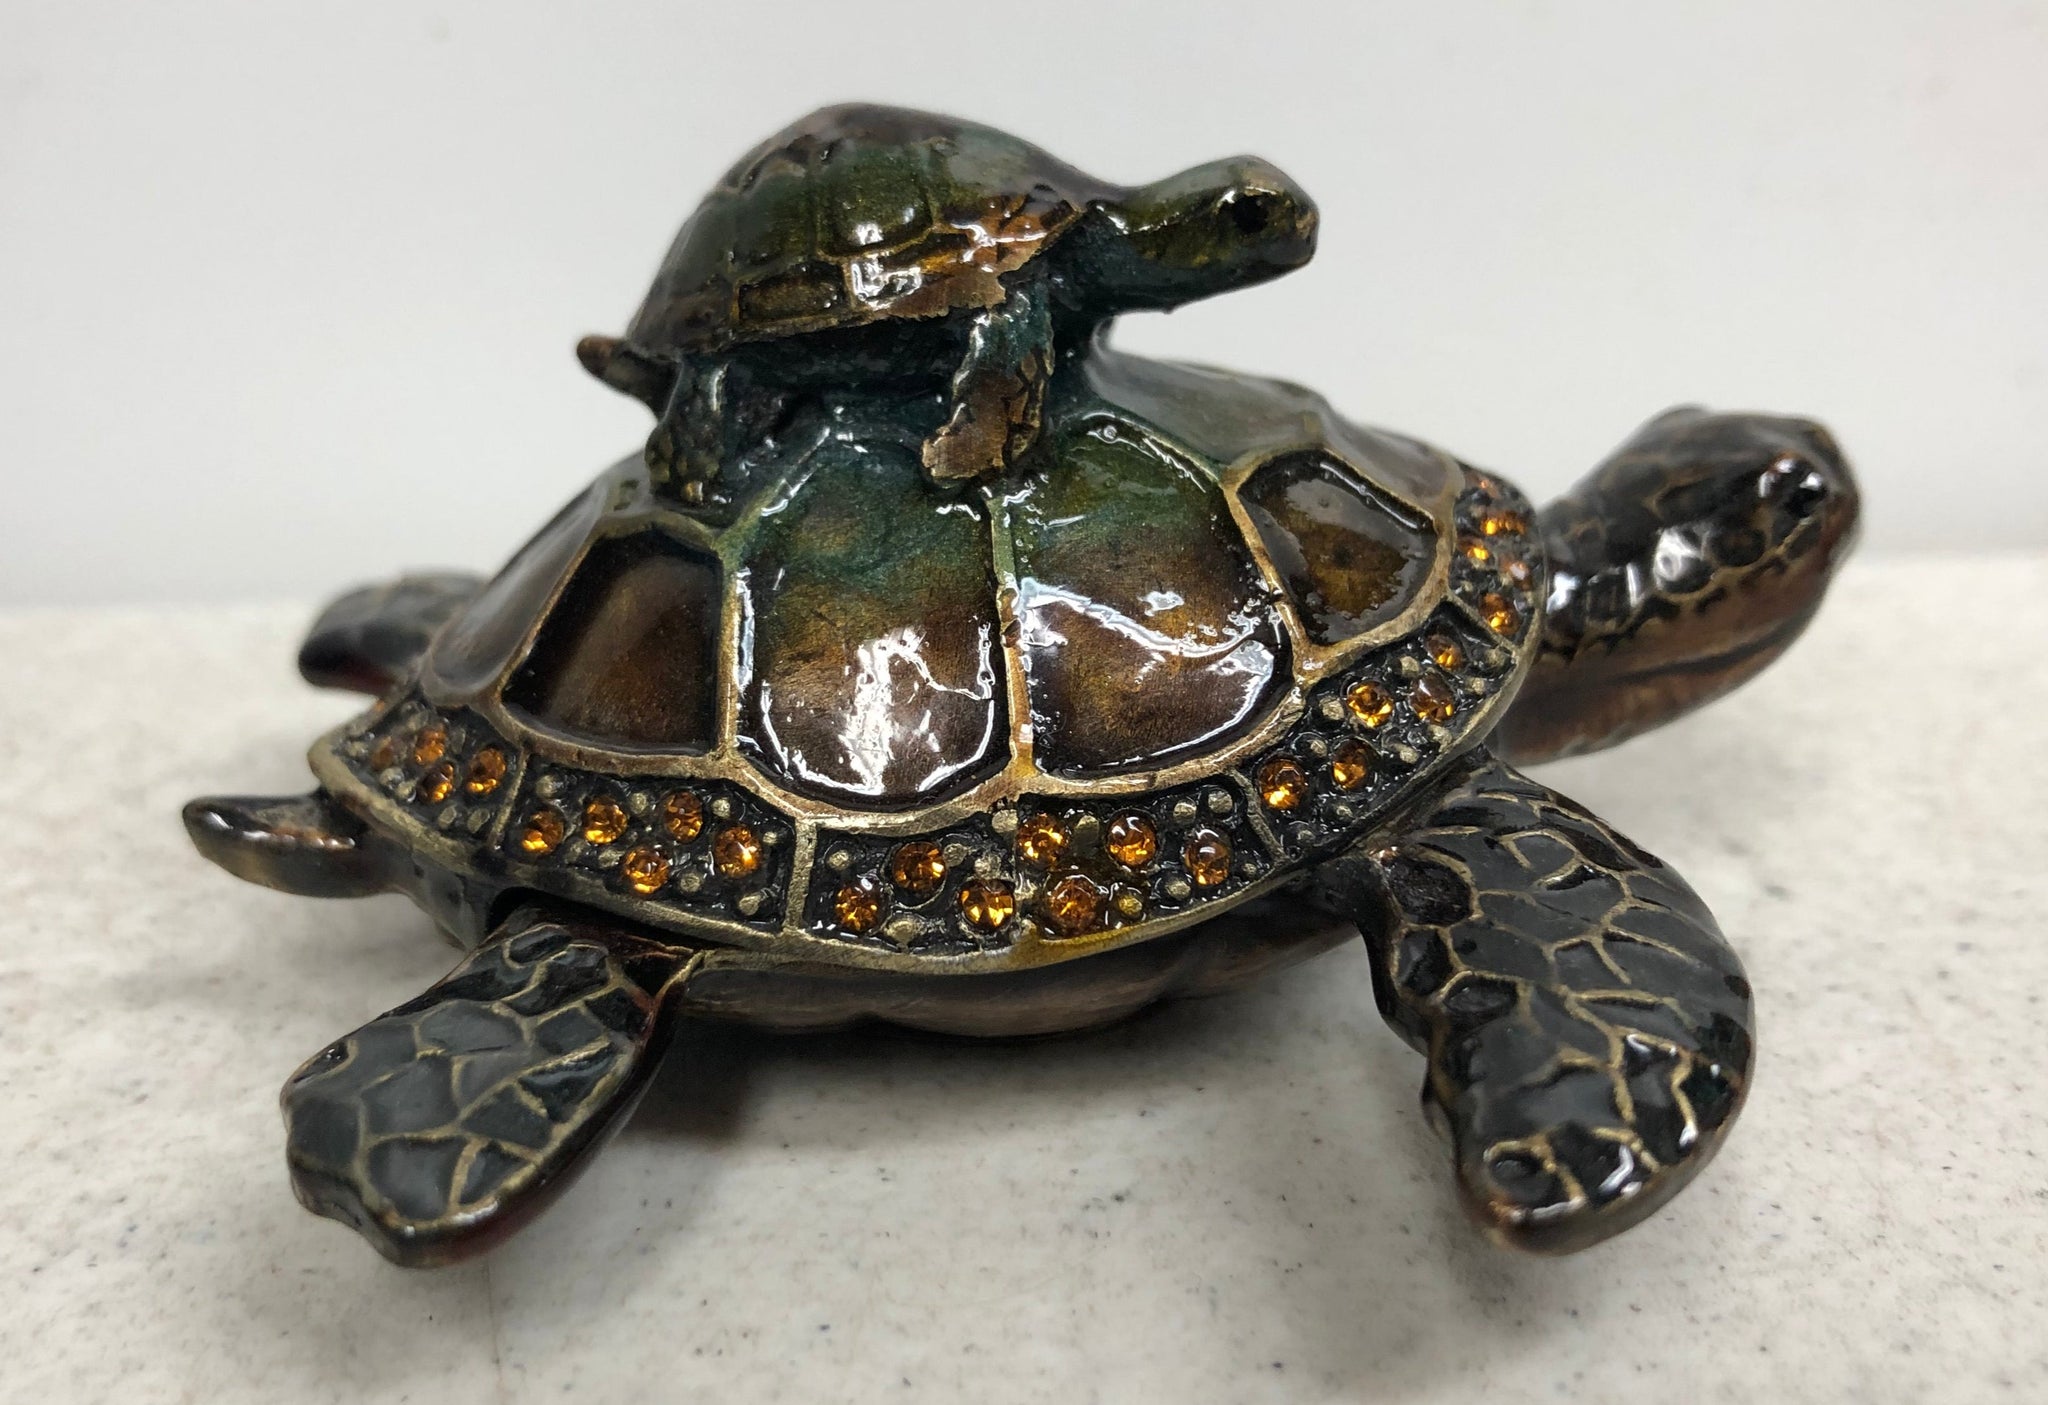 Sea Turtle with Baby Jewelry Box